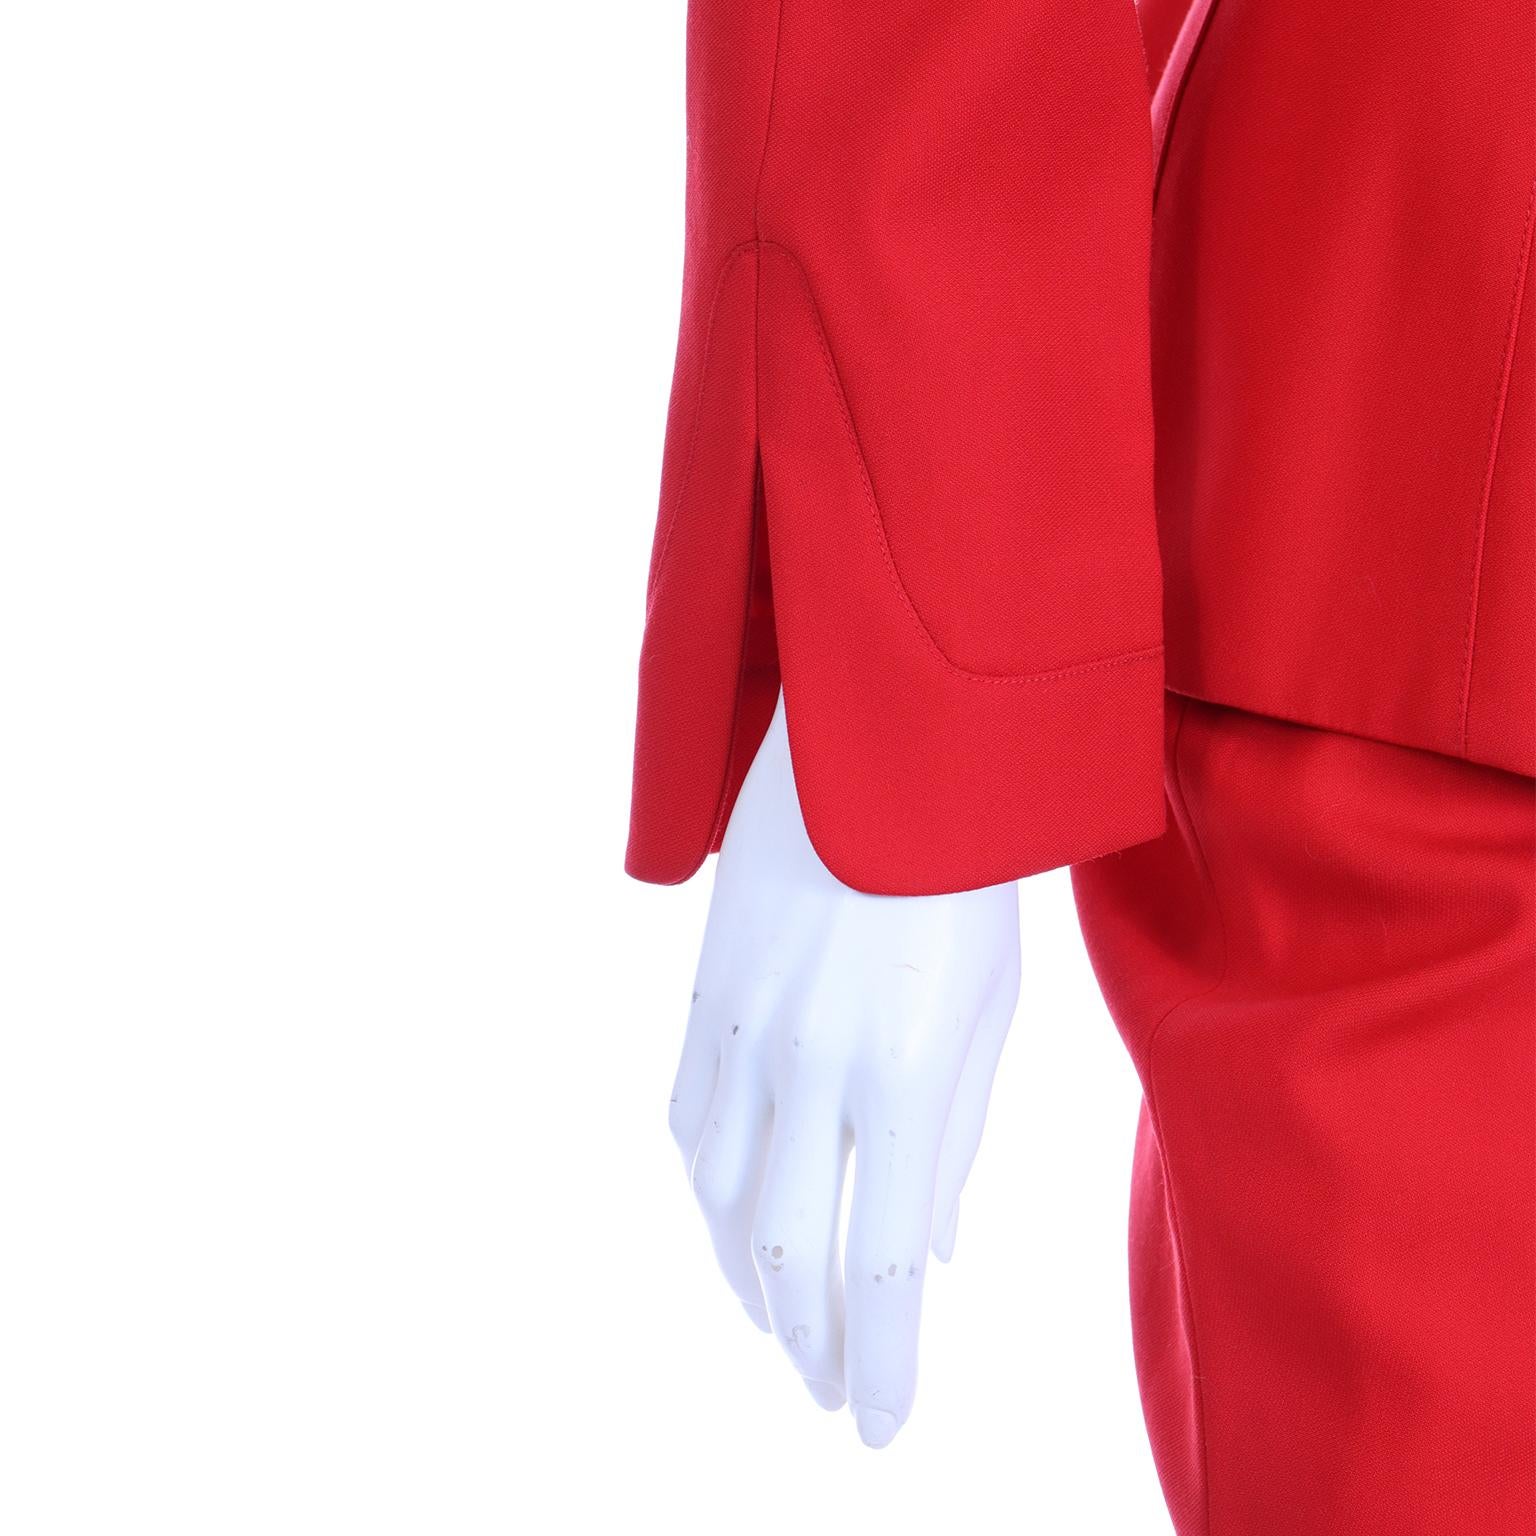 Vintage Red Thierry Mugler Jacket and Skirt Suit Deadstock w Tags 3